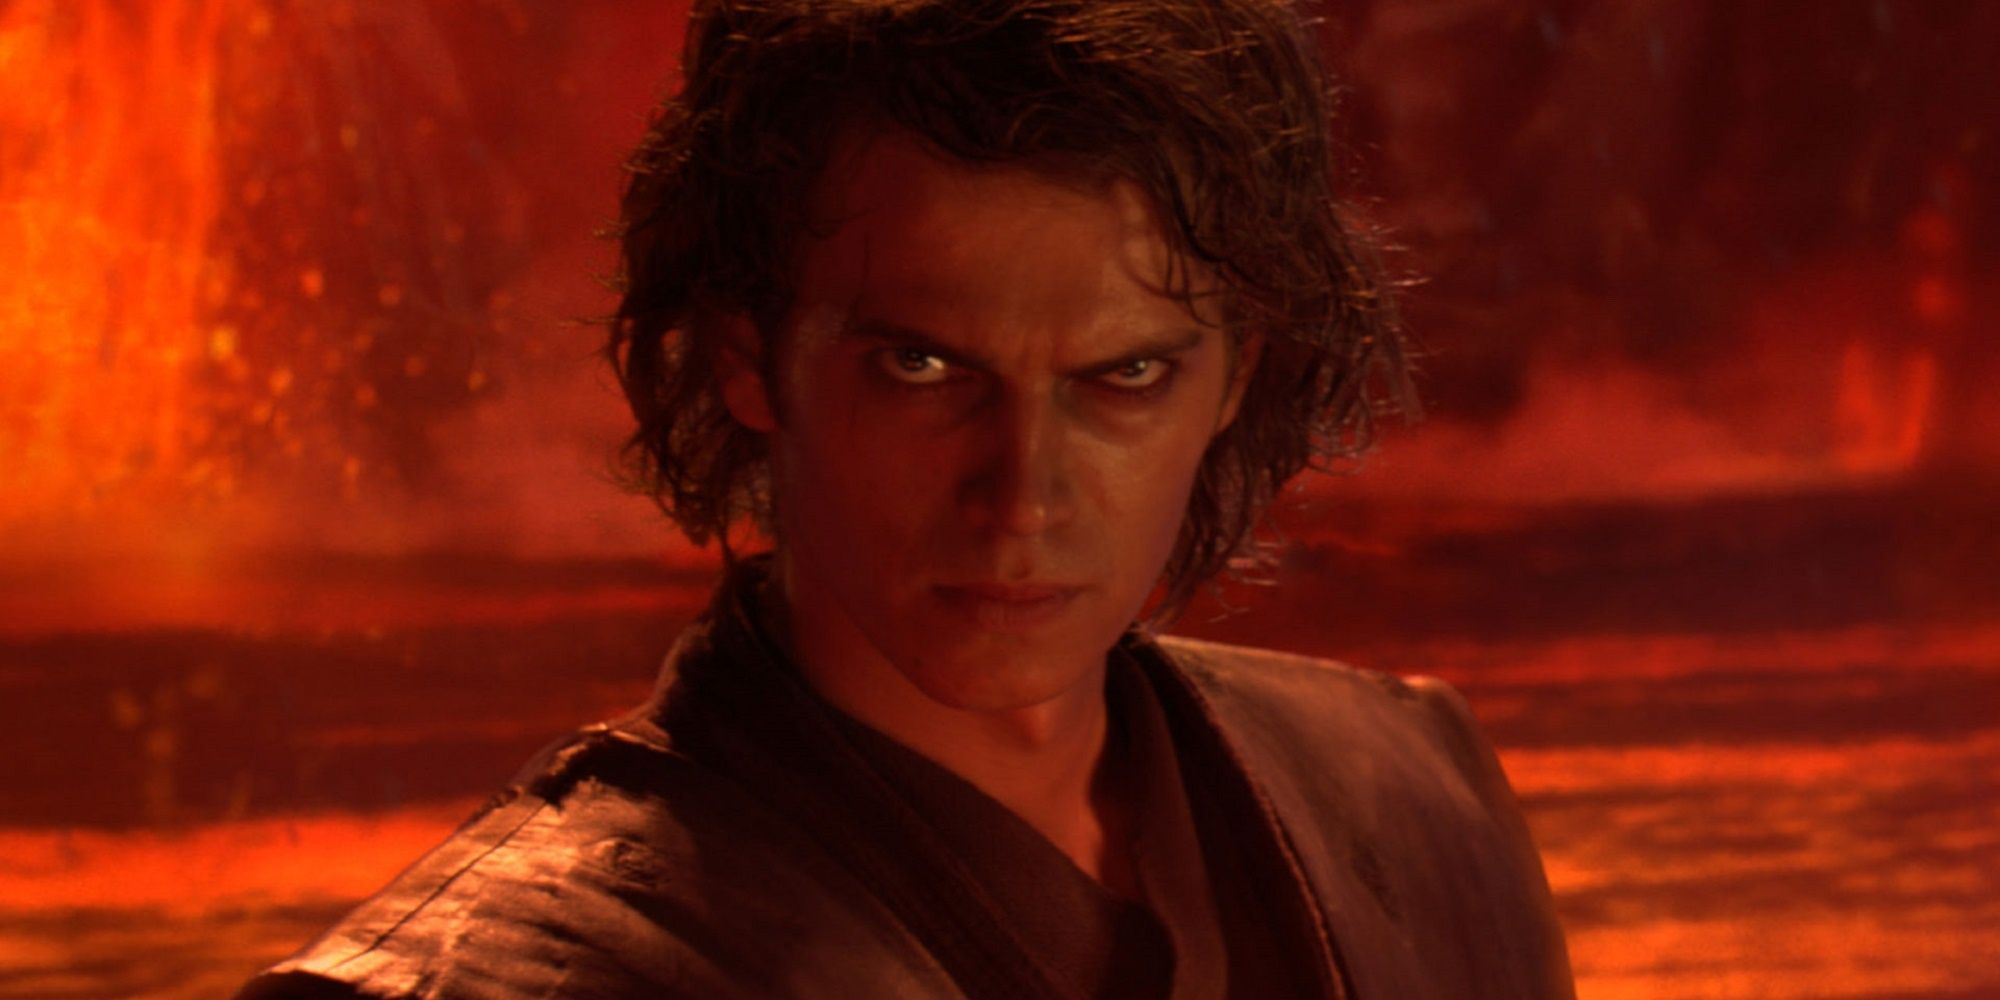 Anakin Skywalker is about to become Darth Vader in 'Star Wars: III.  episode - Revenge of the Sith' at the end of.